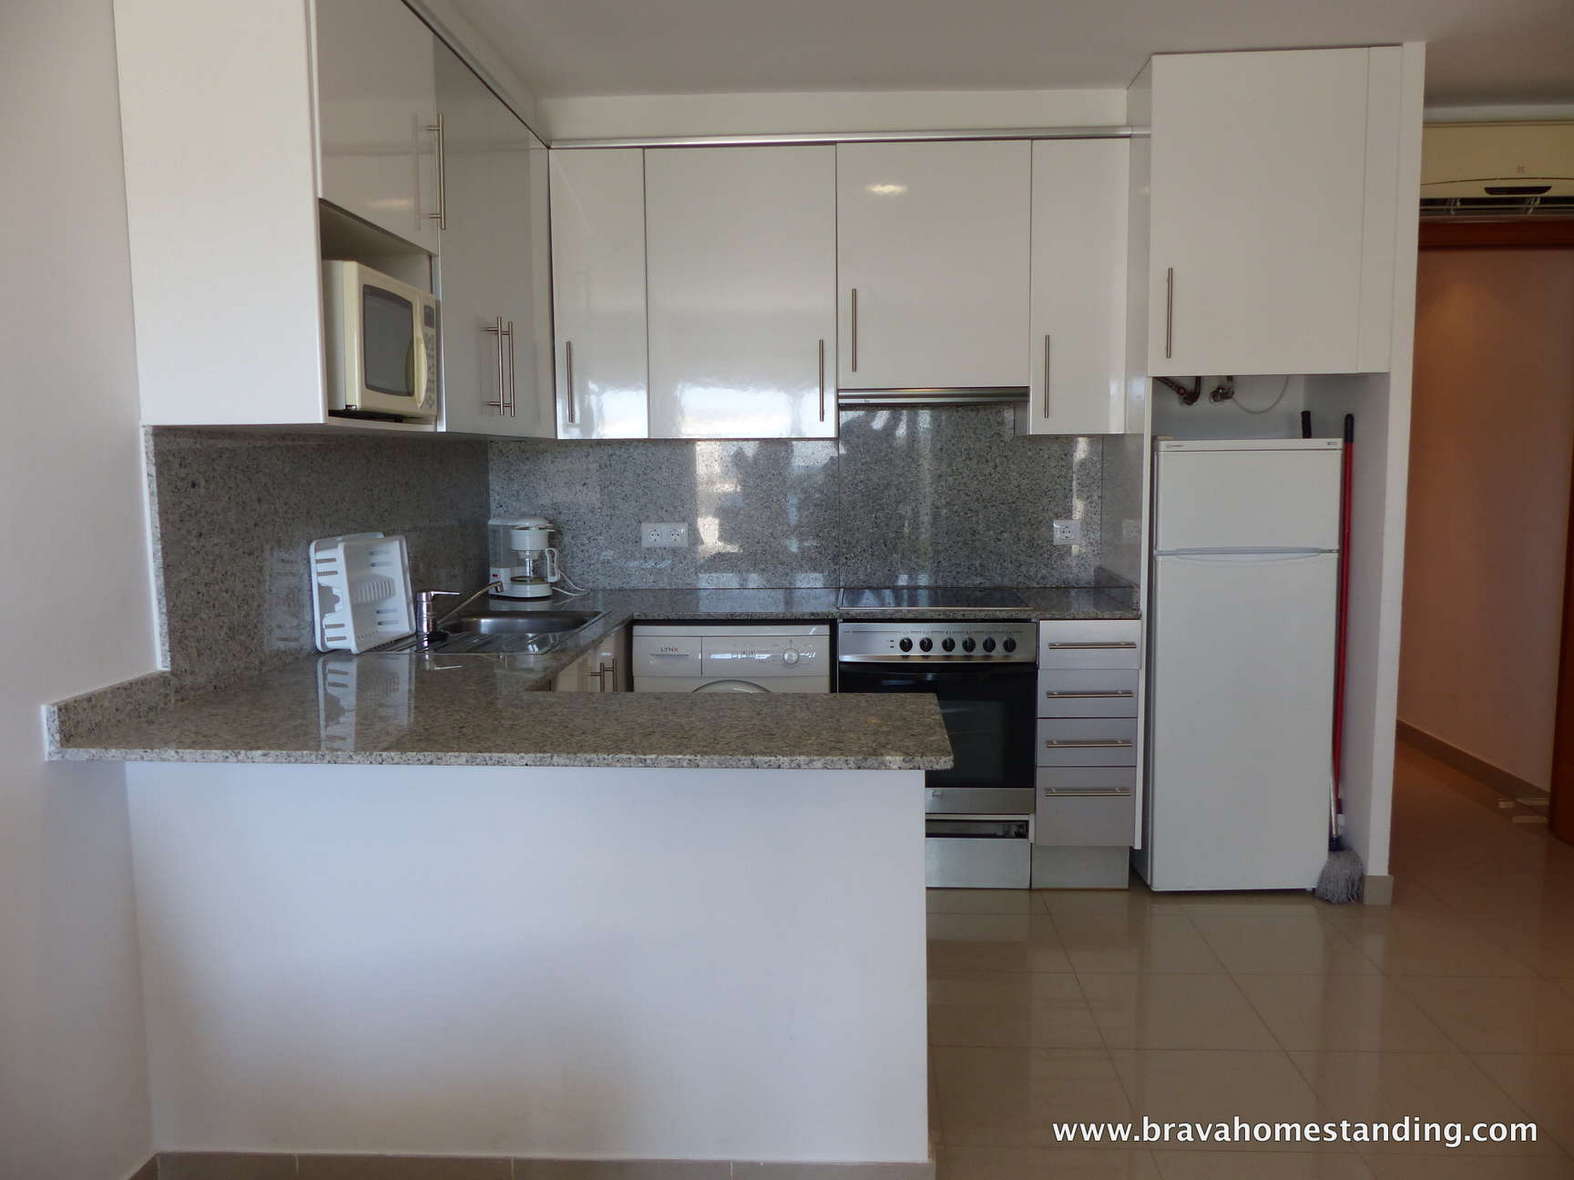 Beautiful apartment with sea view for sale in Rosas - Almadrava